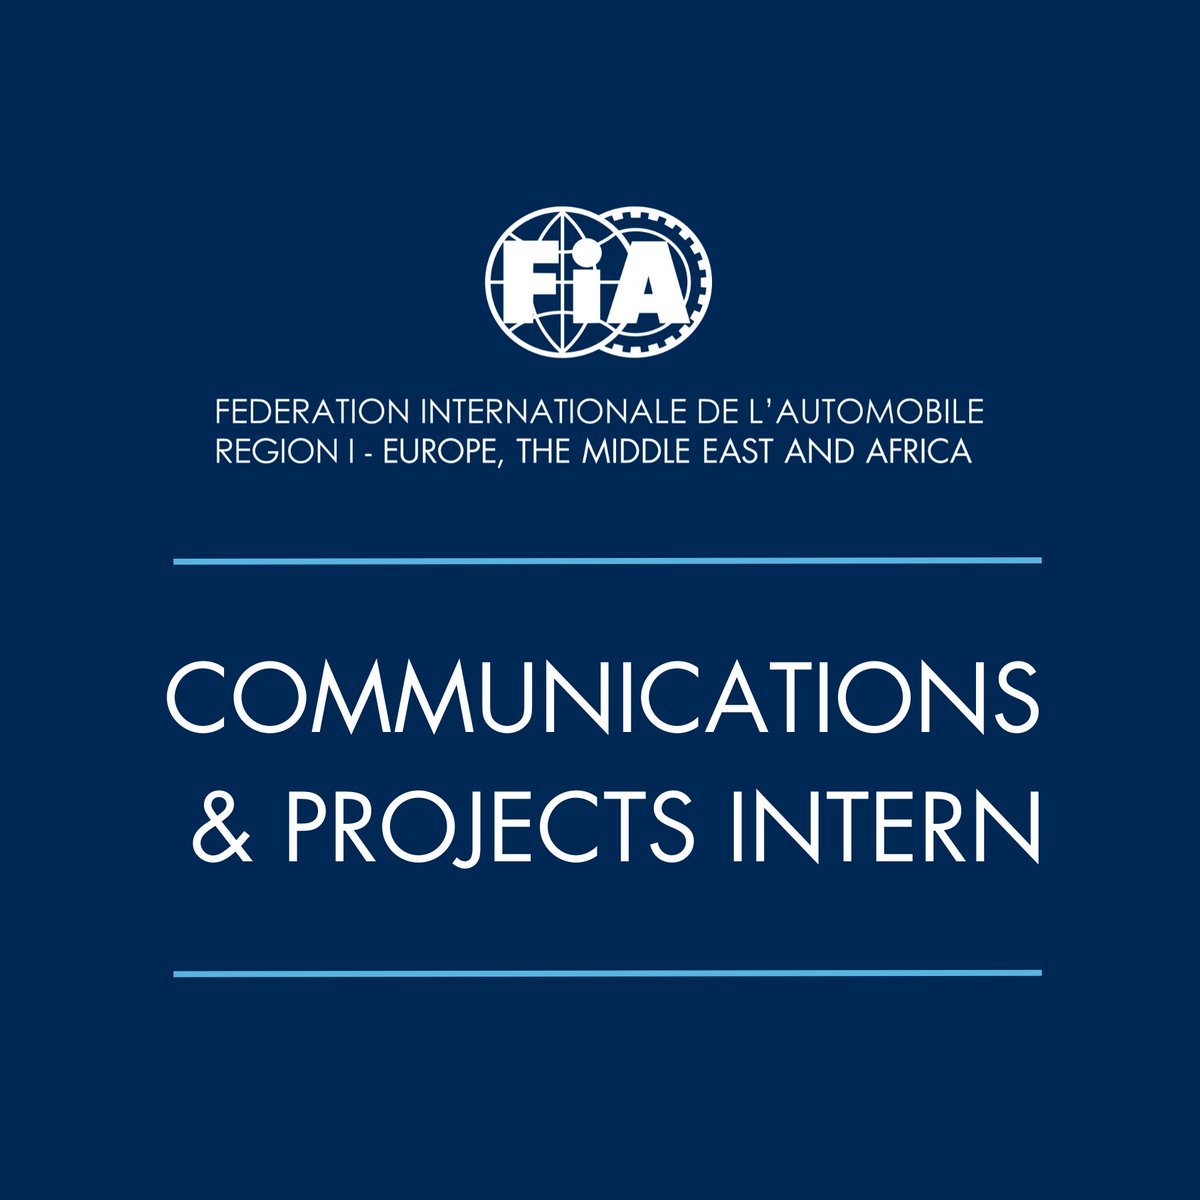 Are you a university student eager to learn and work at the @FIARegionI? We are looking for our next Communications & Projects intern! 📅 Application deadline: 31 May 📅 Starting date: 26 August More information fiaregion1.com/about-us/oppor… #internship